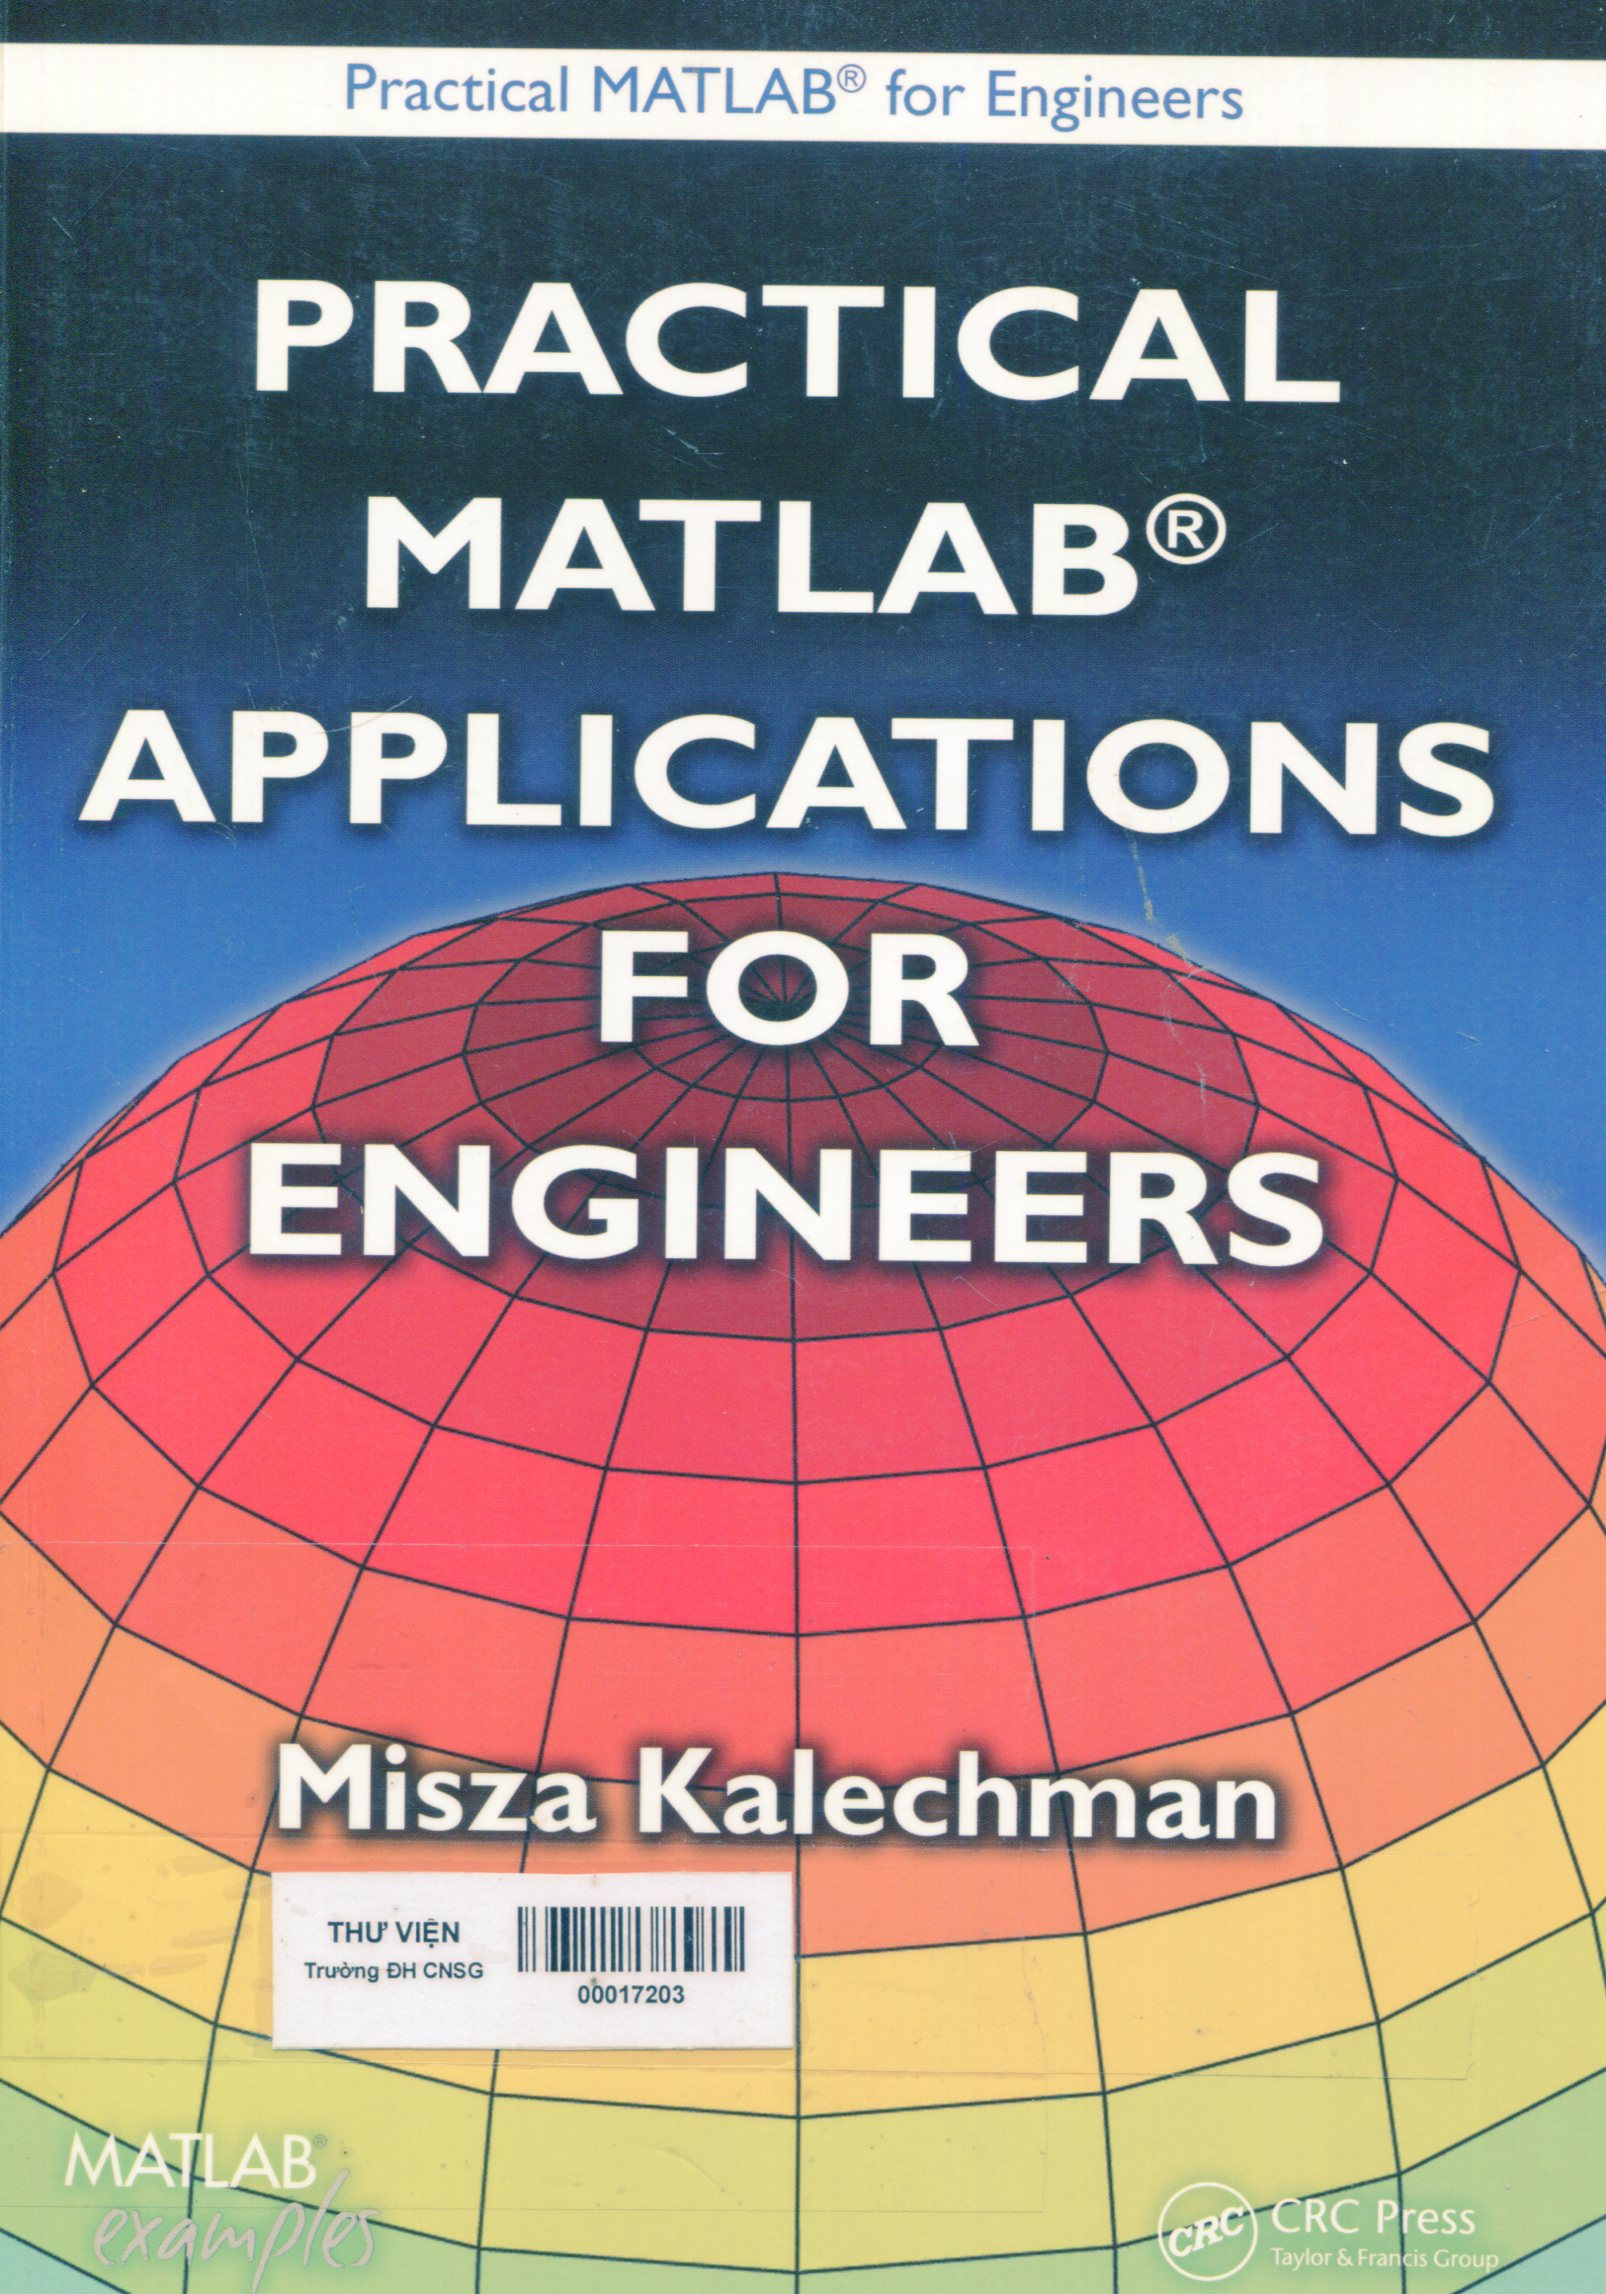 Practical MATLAB applications for engineers